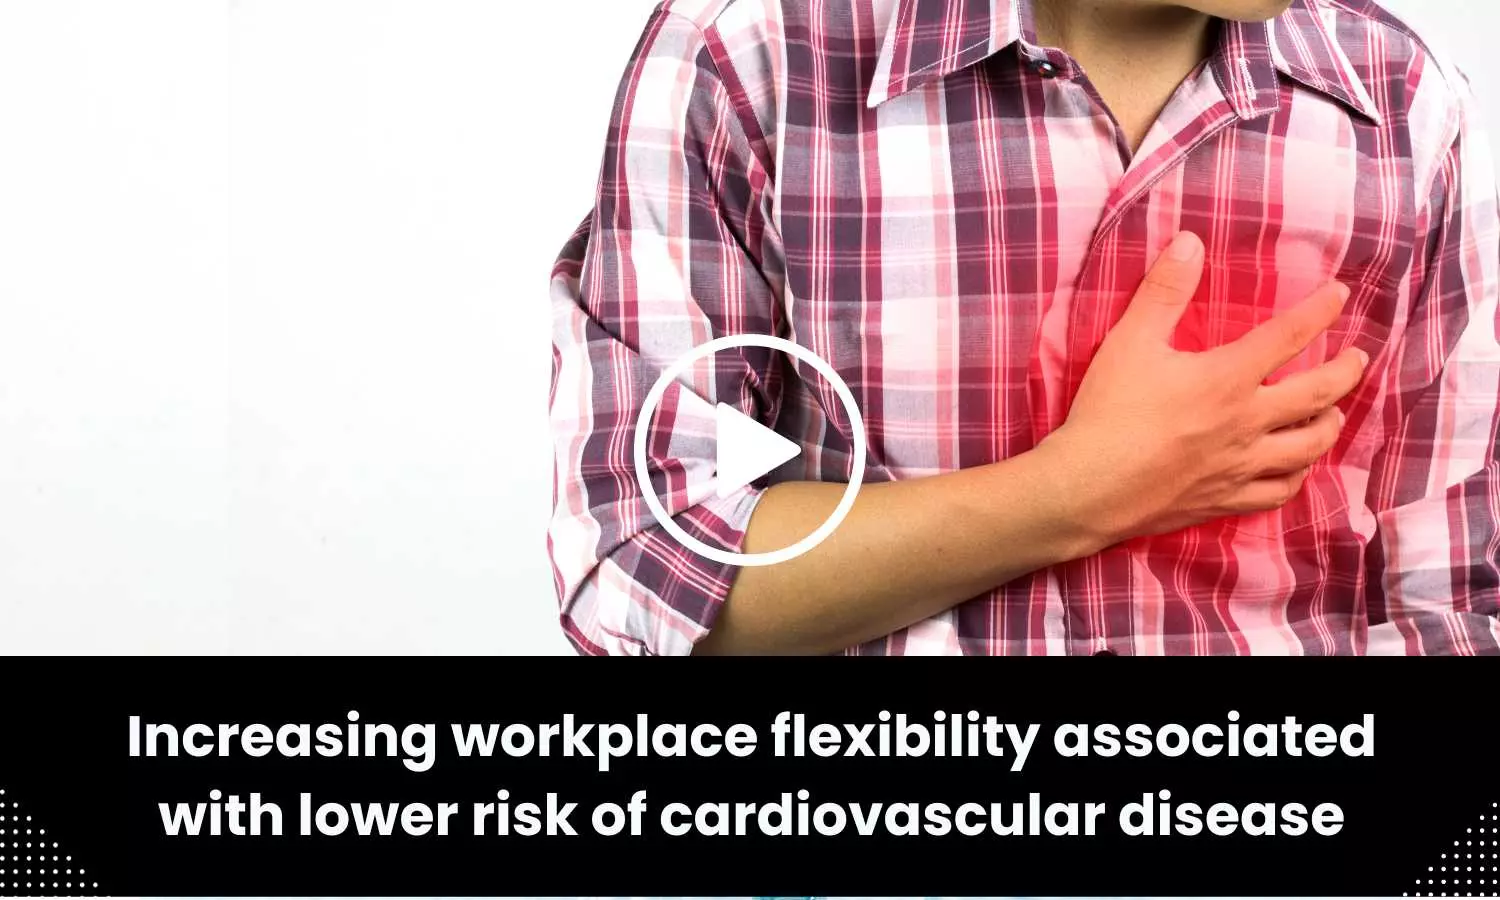 Increasing workplace flexibility associated with lower risk of cardiovascular disease